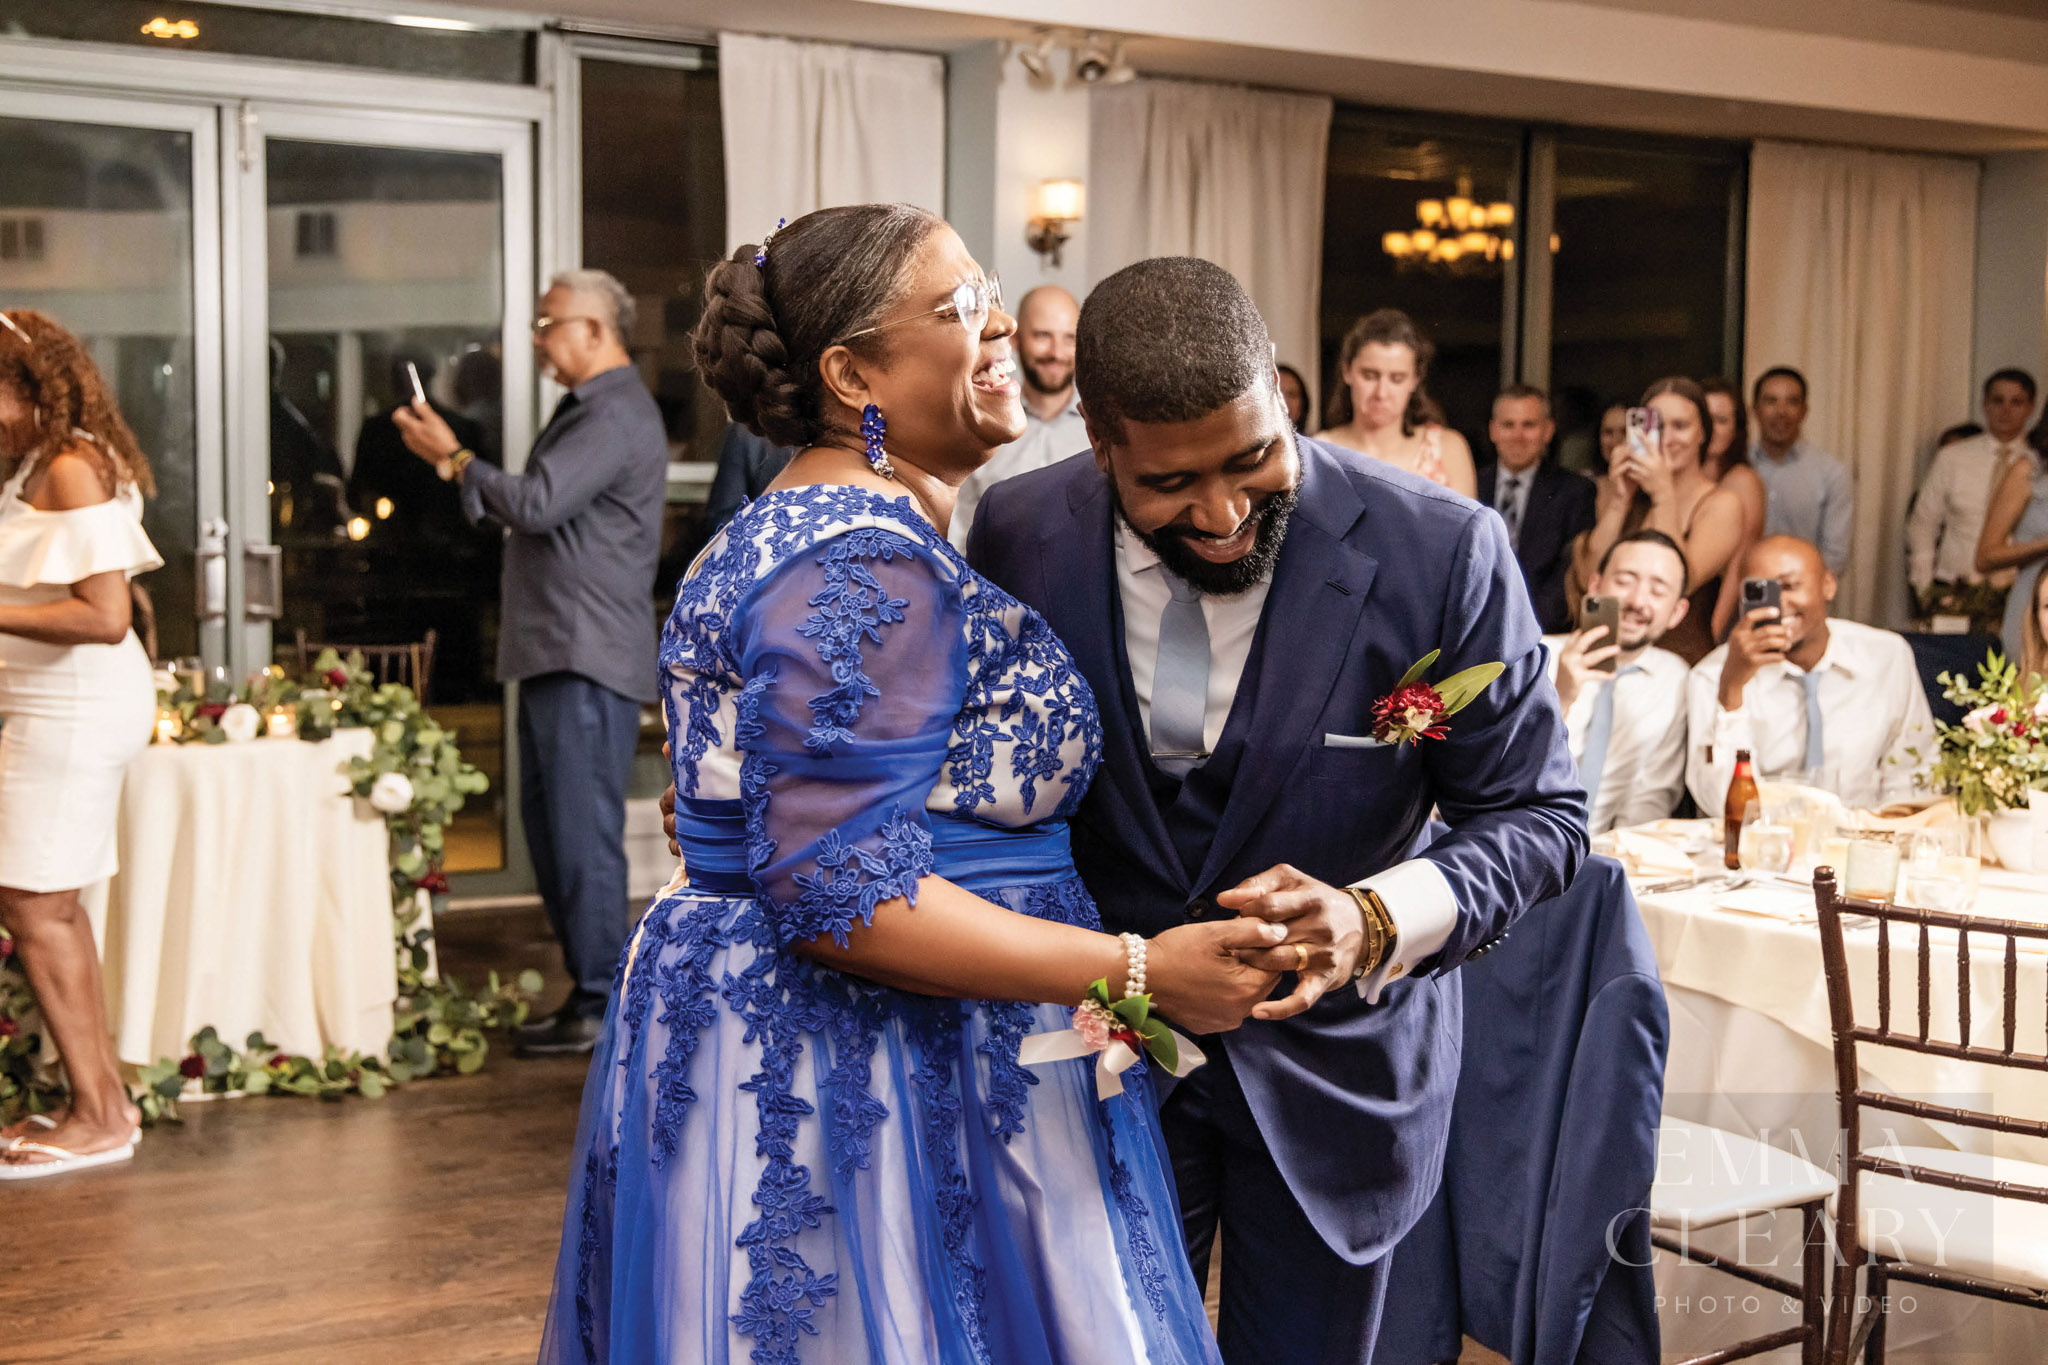 The dance of the groom and mom